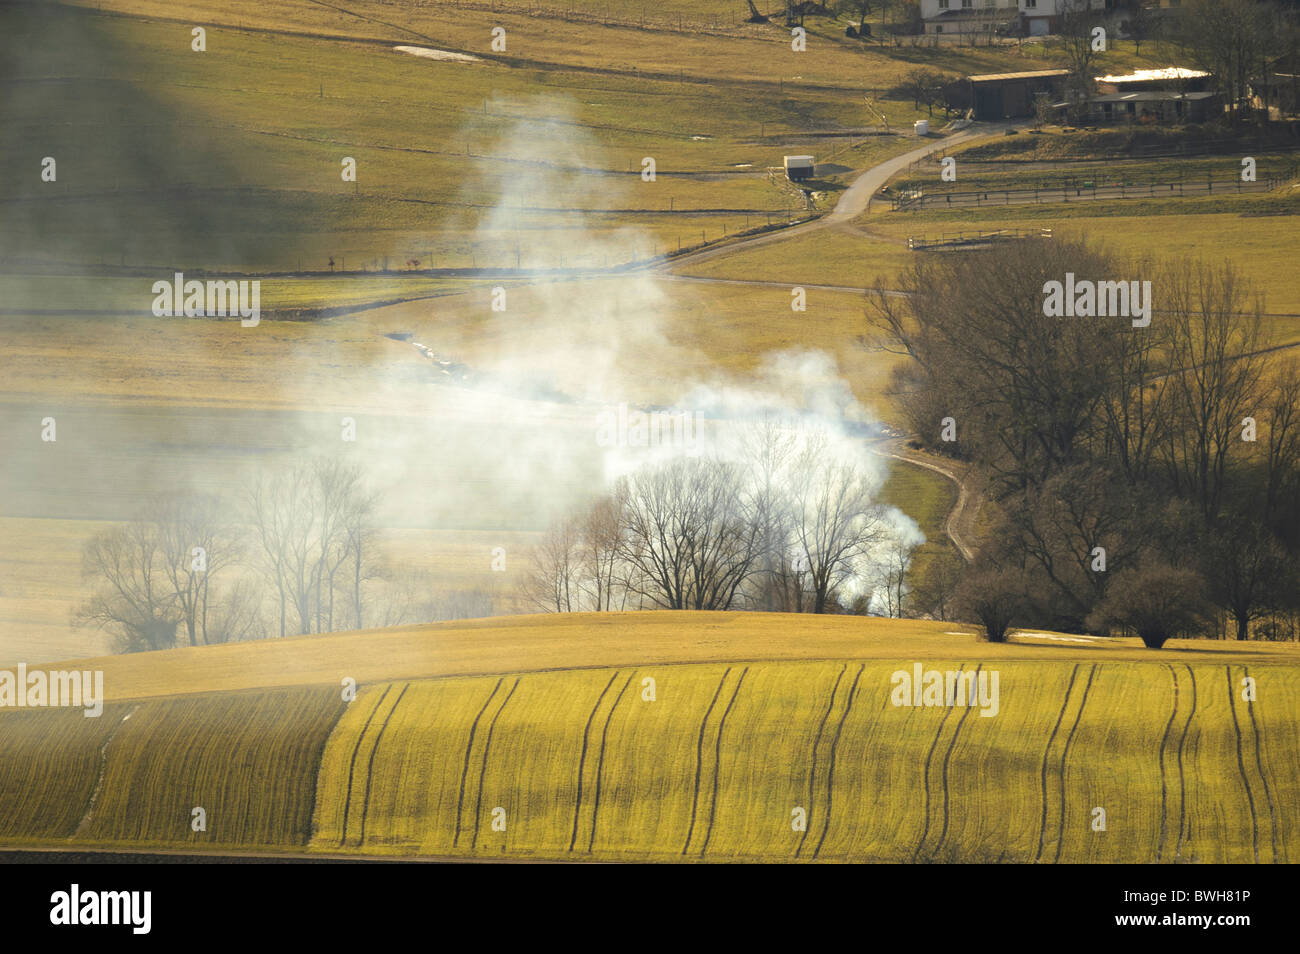 Smoke over agrarian fields sprayed with liquid manure, horse barn in background, Swabian alb, Germany Stock Photo